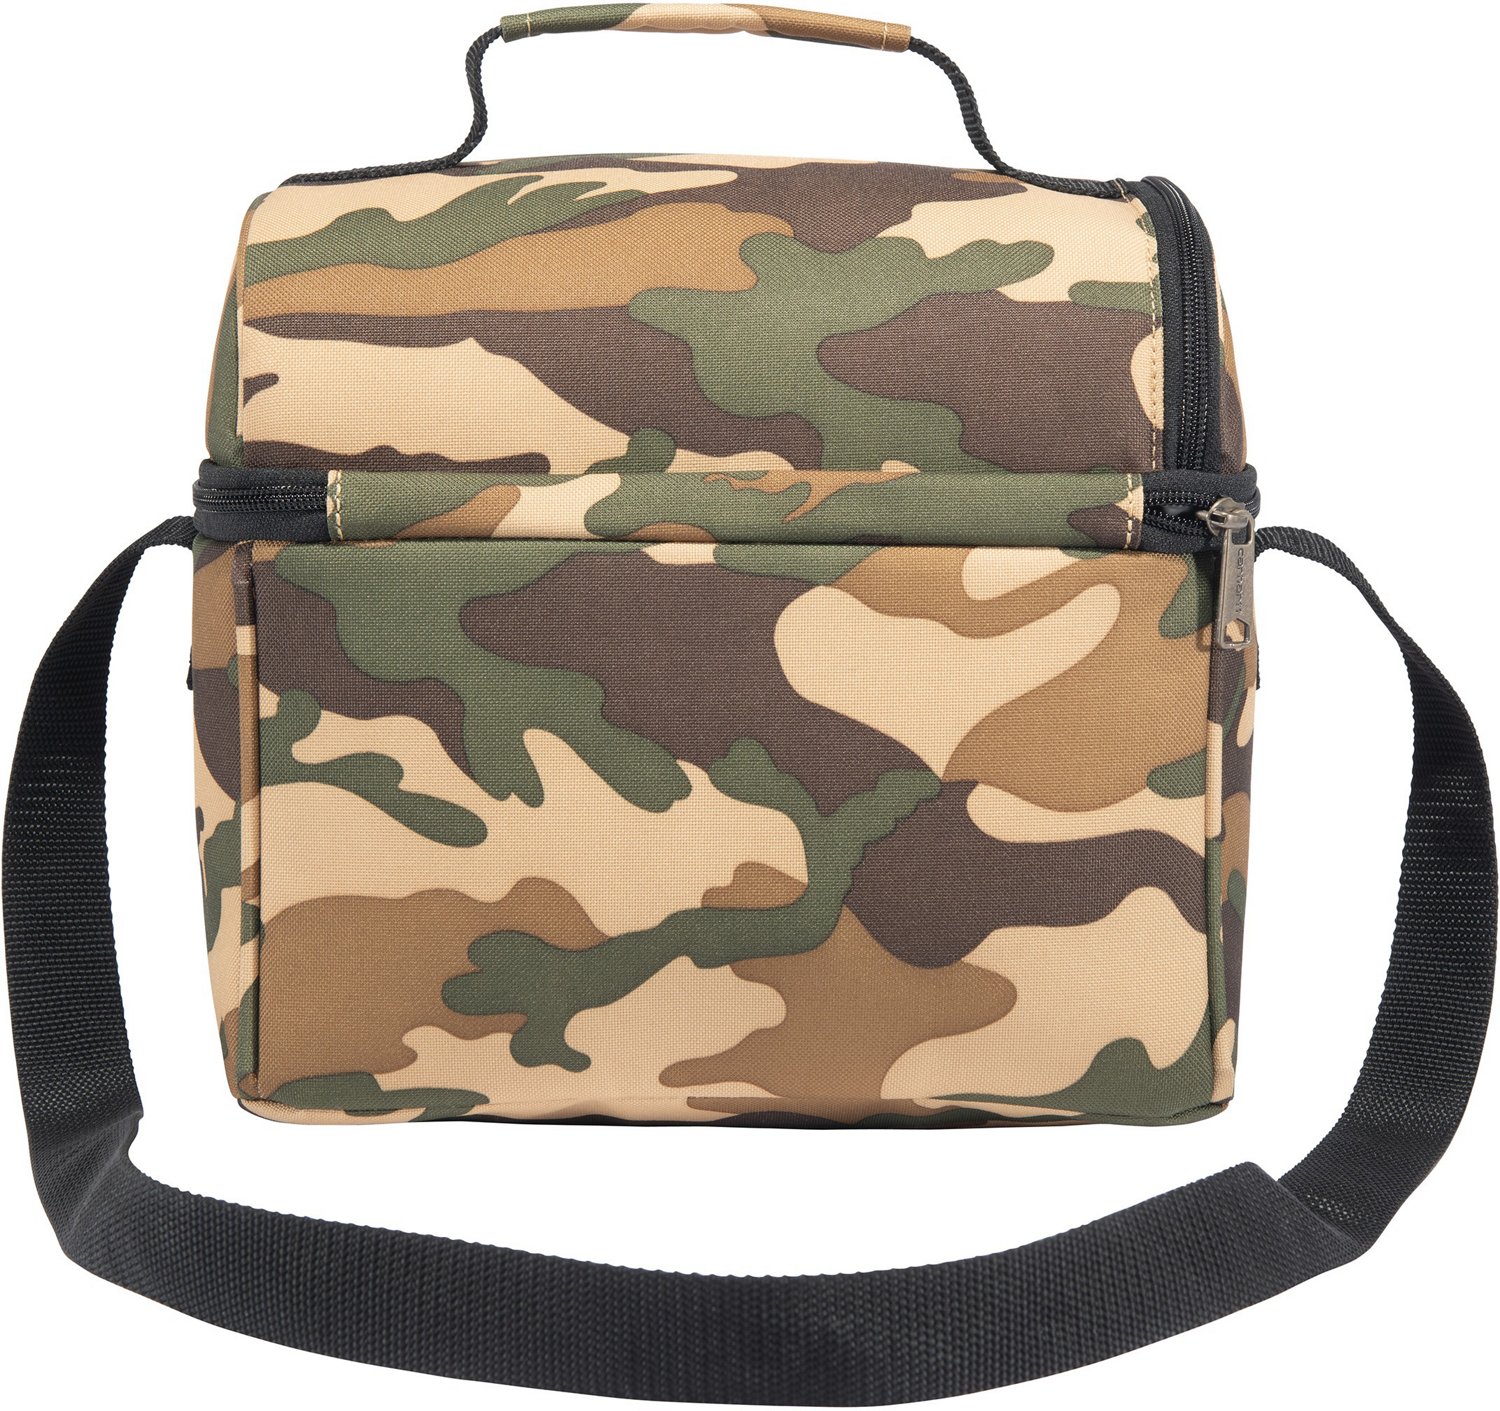 12+ Camouflage Lunch Box